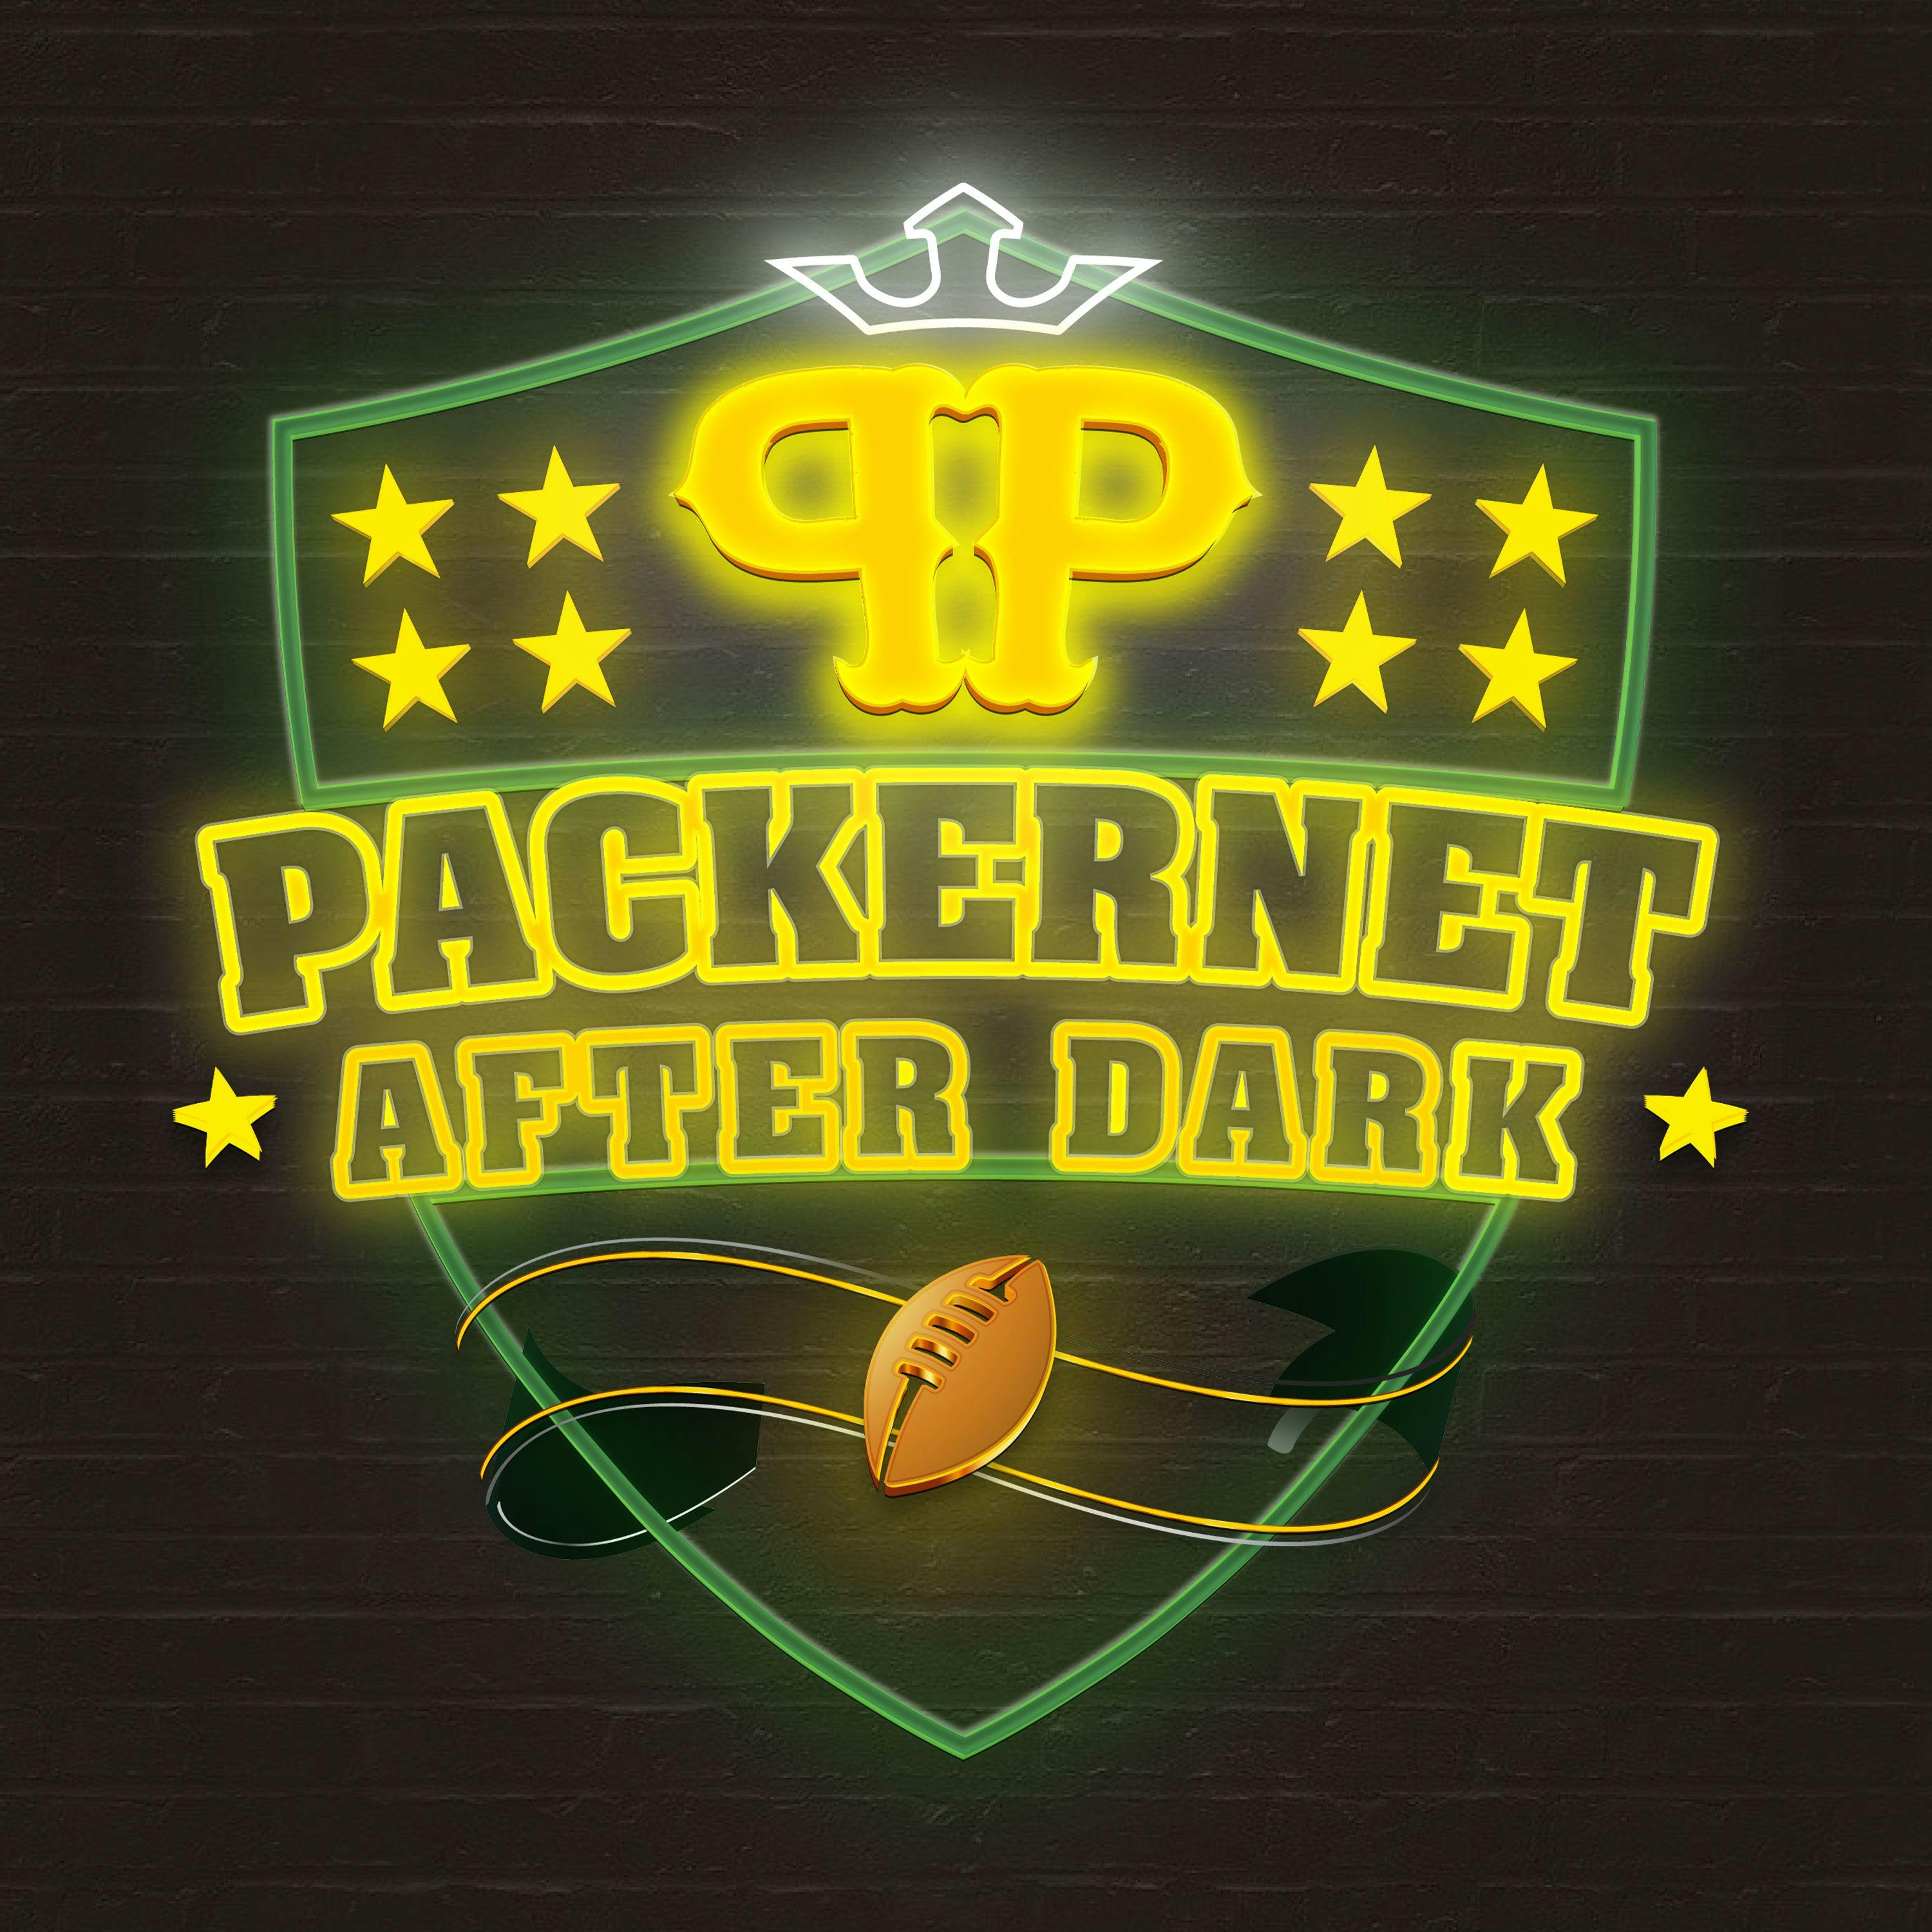 Packernet After Dark: Draft Strategy and Fan Fervor in the Lead-Up to the Big Day